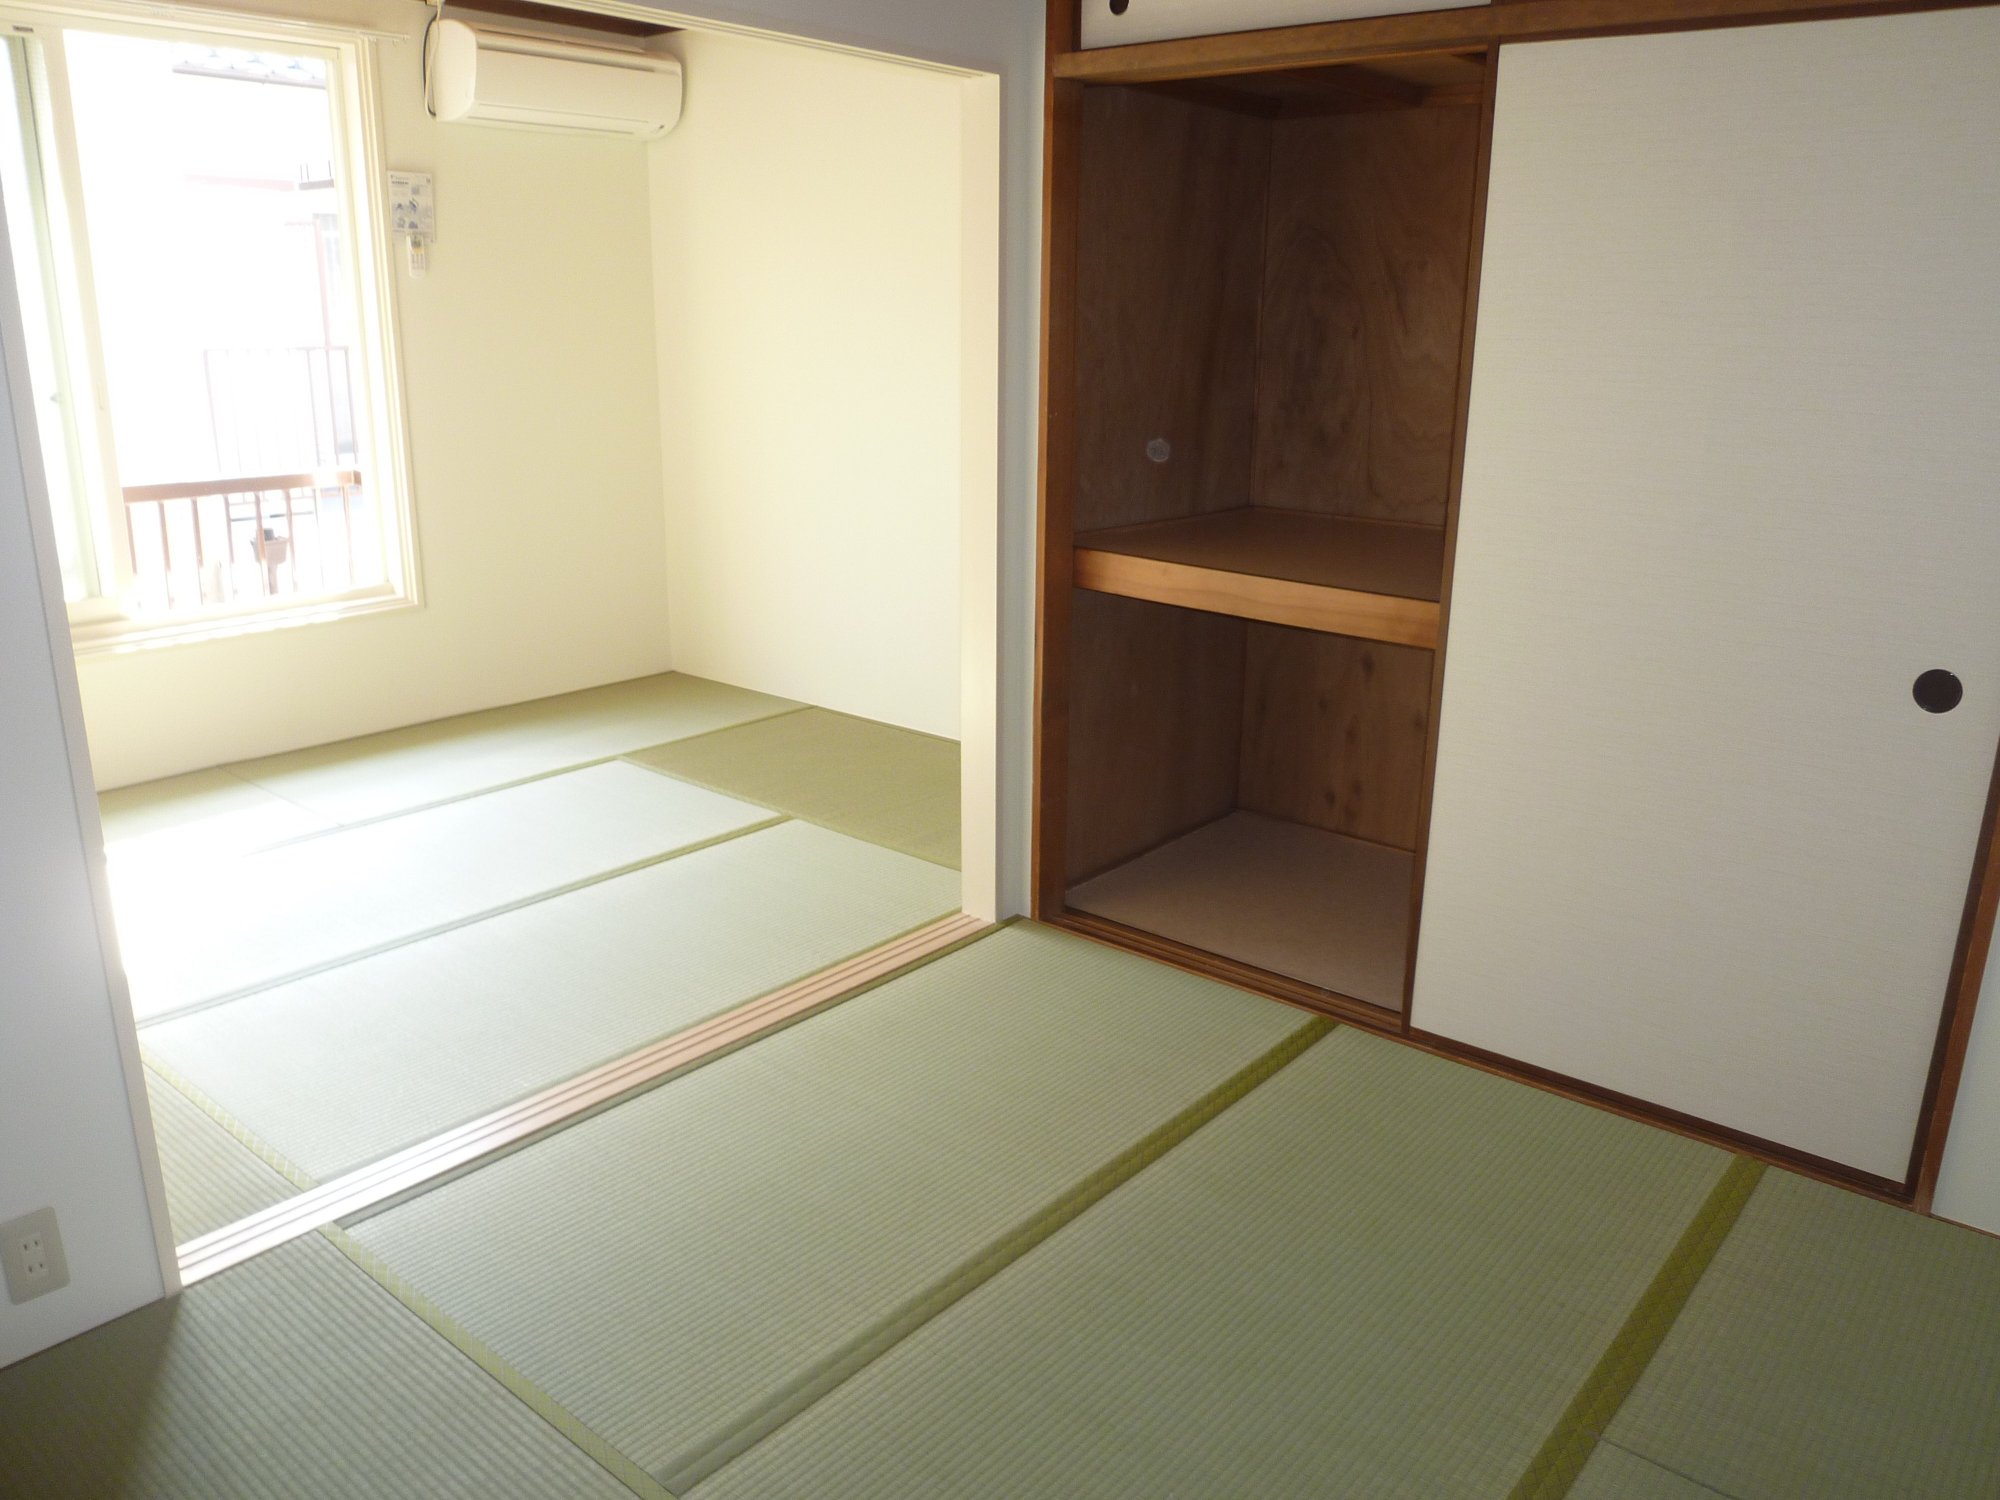 Other room space. There is also a closet large.